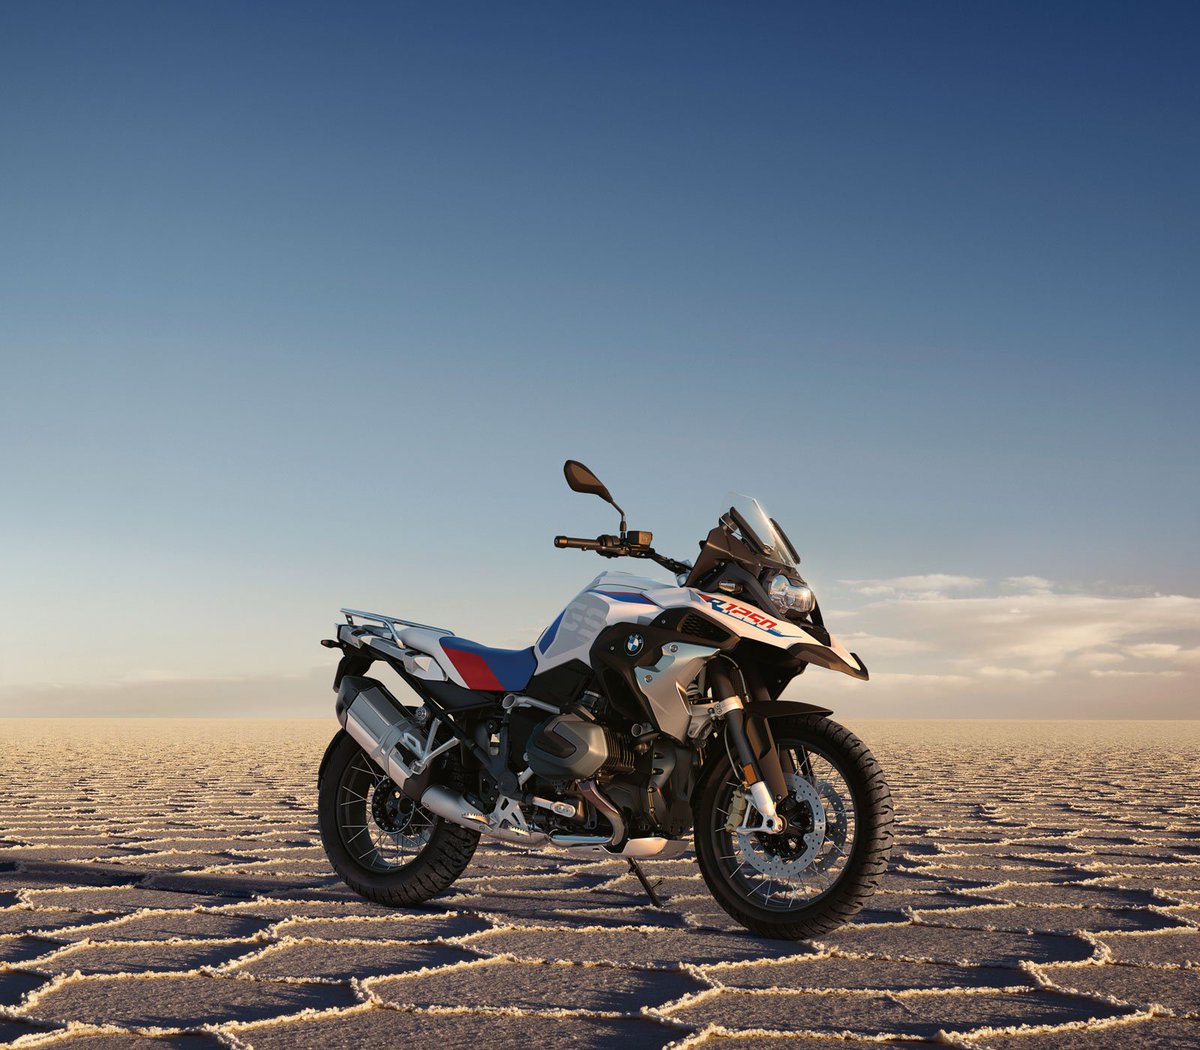 The BMW R 1250 GS and the R 1300 GS predecessor were built for adventure unleashing the #SpiritOfGS. The #R1300GSLaunch promises to unravel the great strides made by BMW Motorrad in improving the new bike. #R1300GS_ke